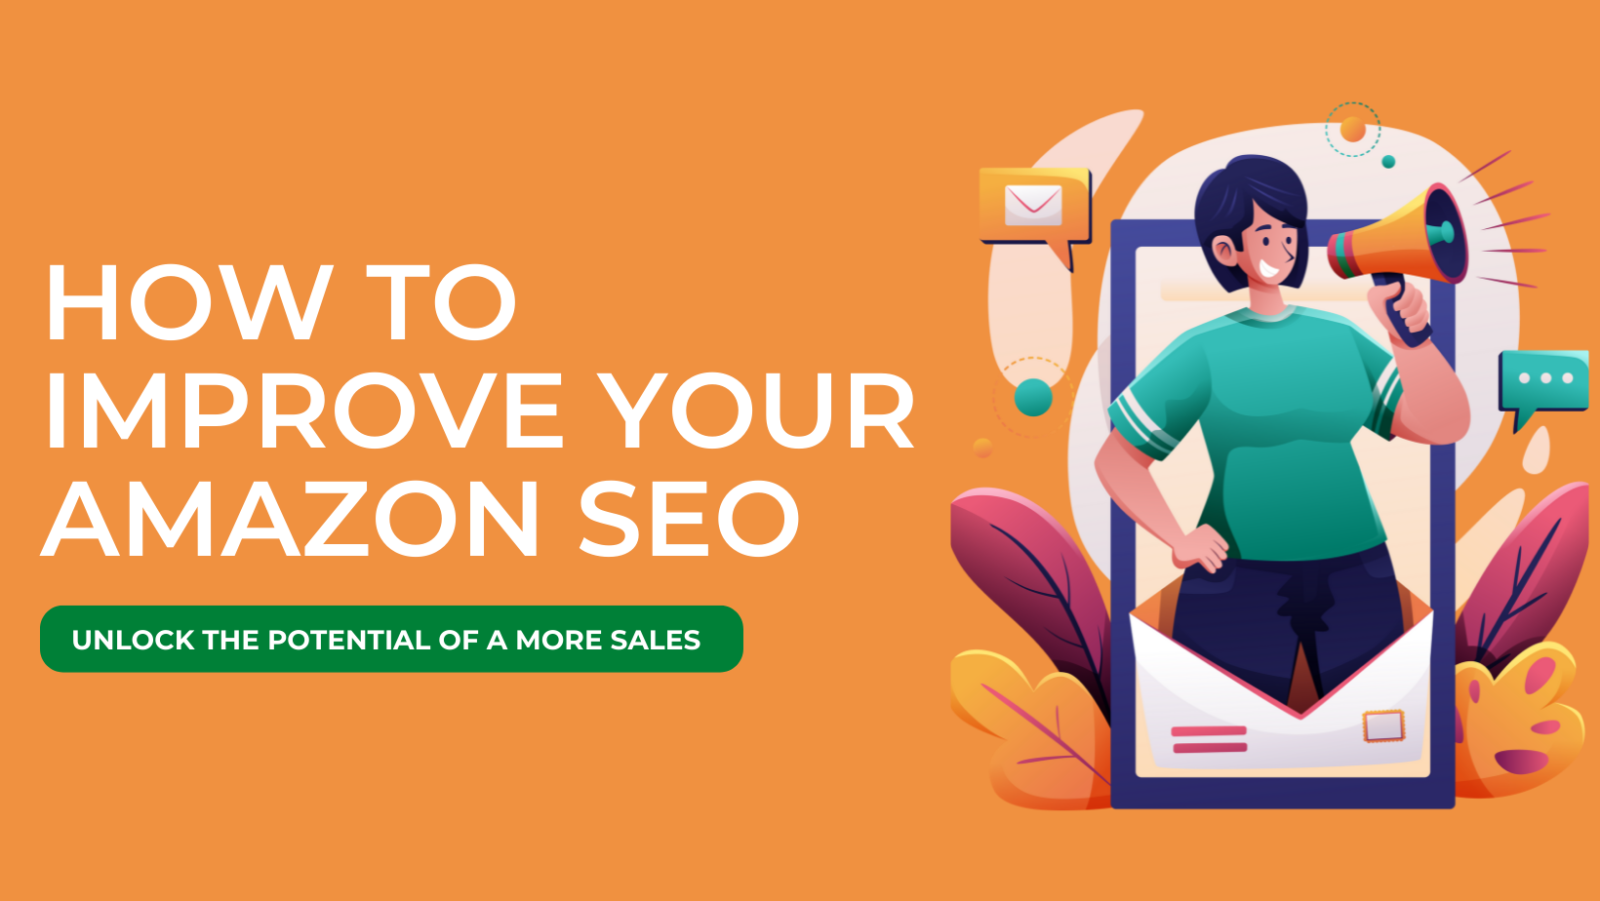 How to Improve Your Amazon SEO: Unlock the Potential of a More Sales